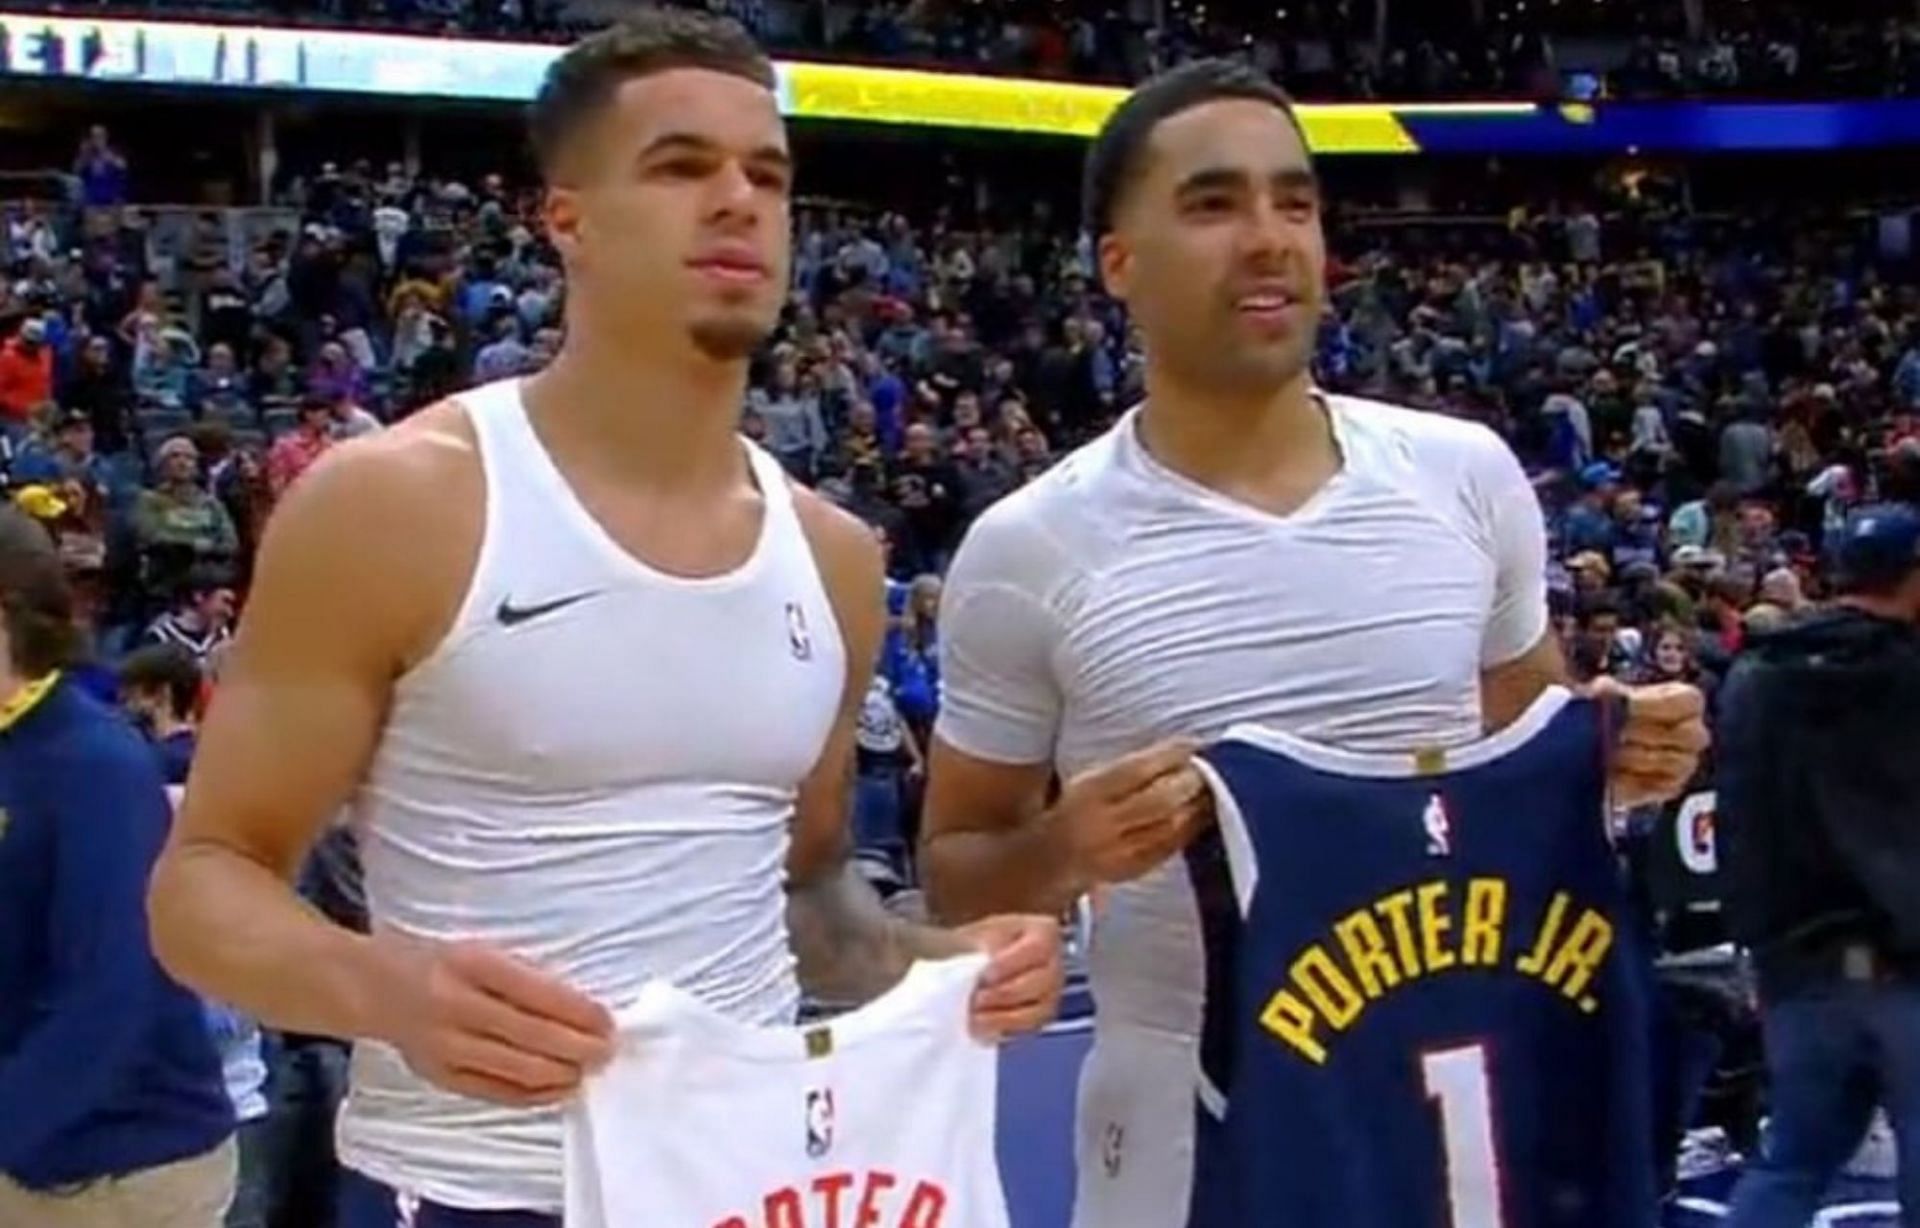 Jontay Porter is the younger brother of Michael Porter Jr.